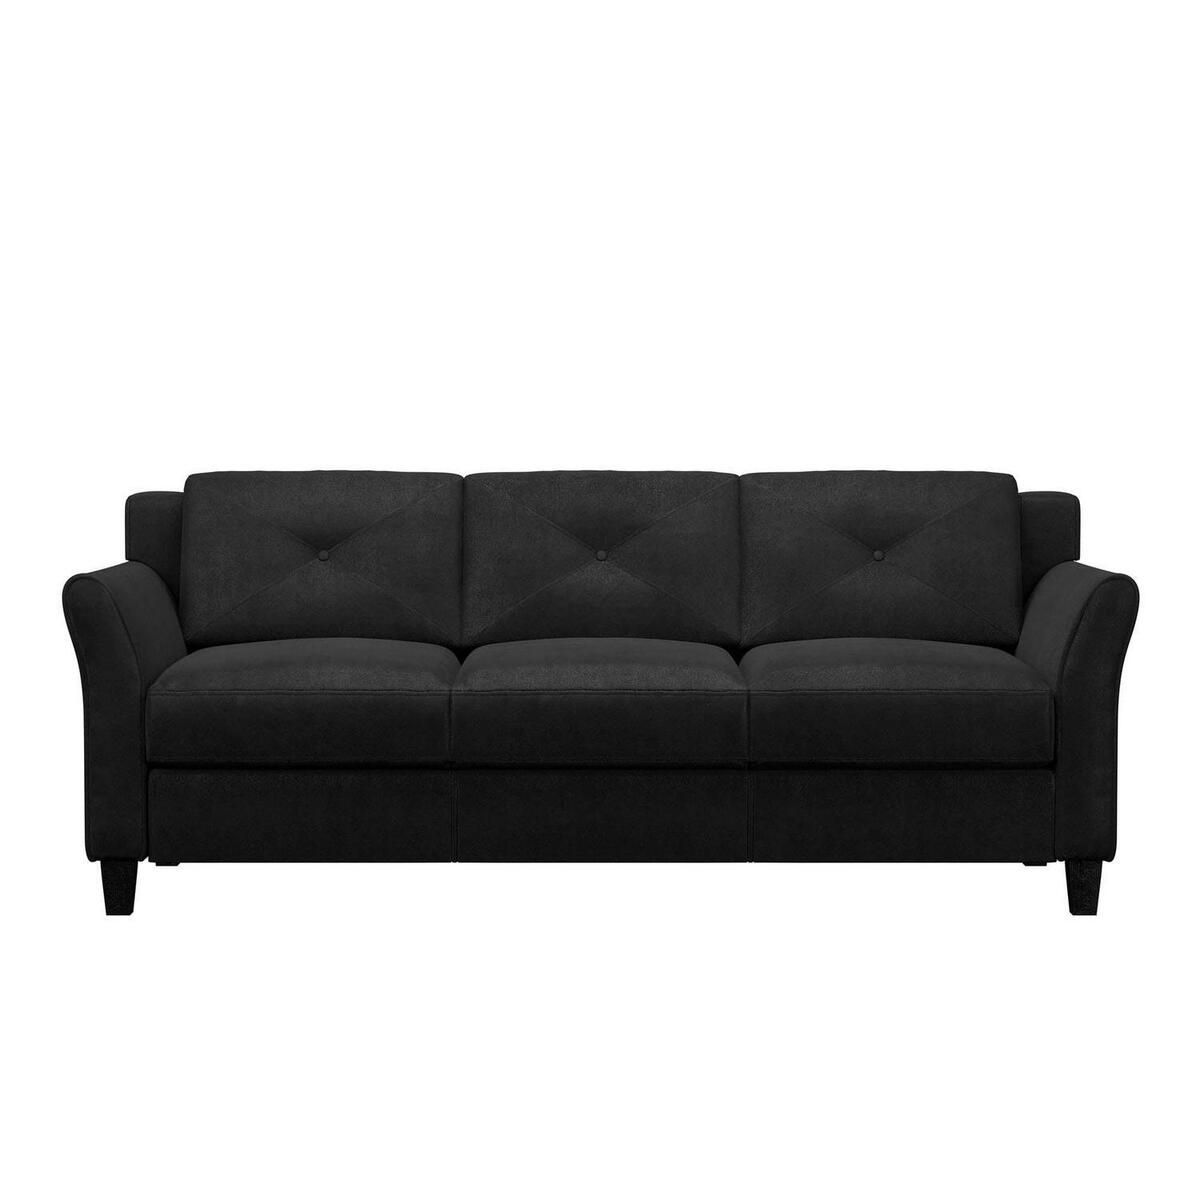 Traditional Sofa Curved Rolled Arms Comfortable Taryn Black Fabric | Ebay Regarding Traditional Black Fabric Sofas (View 4 of 15)